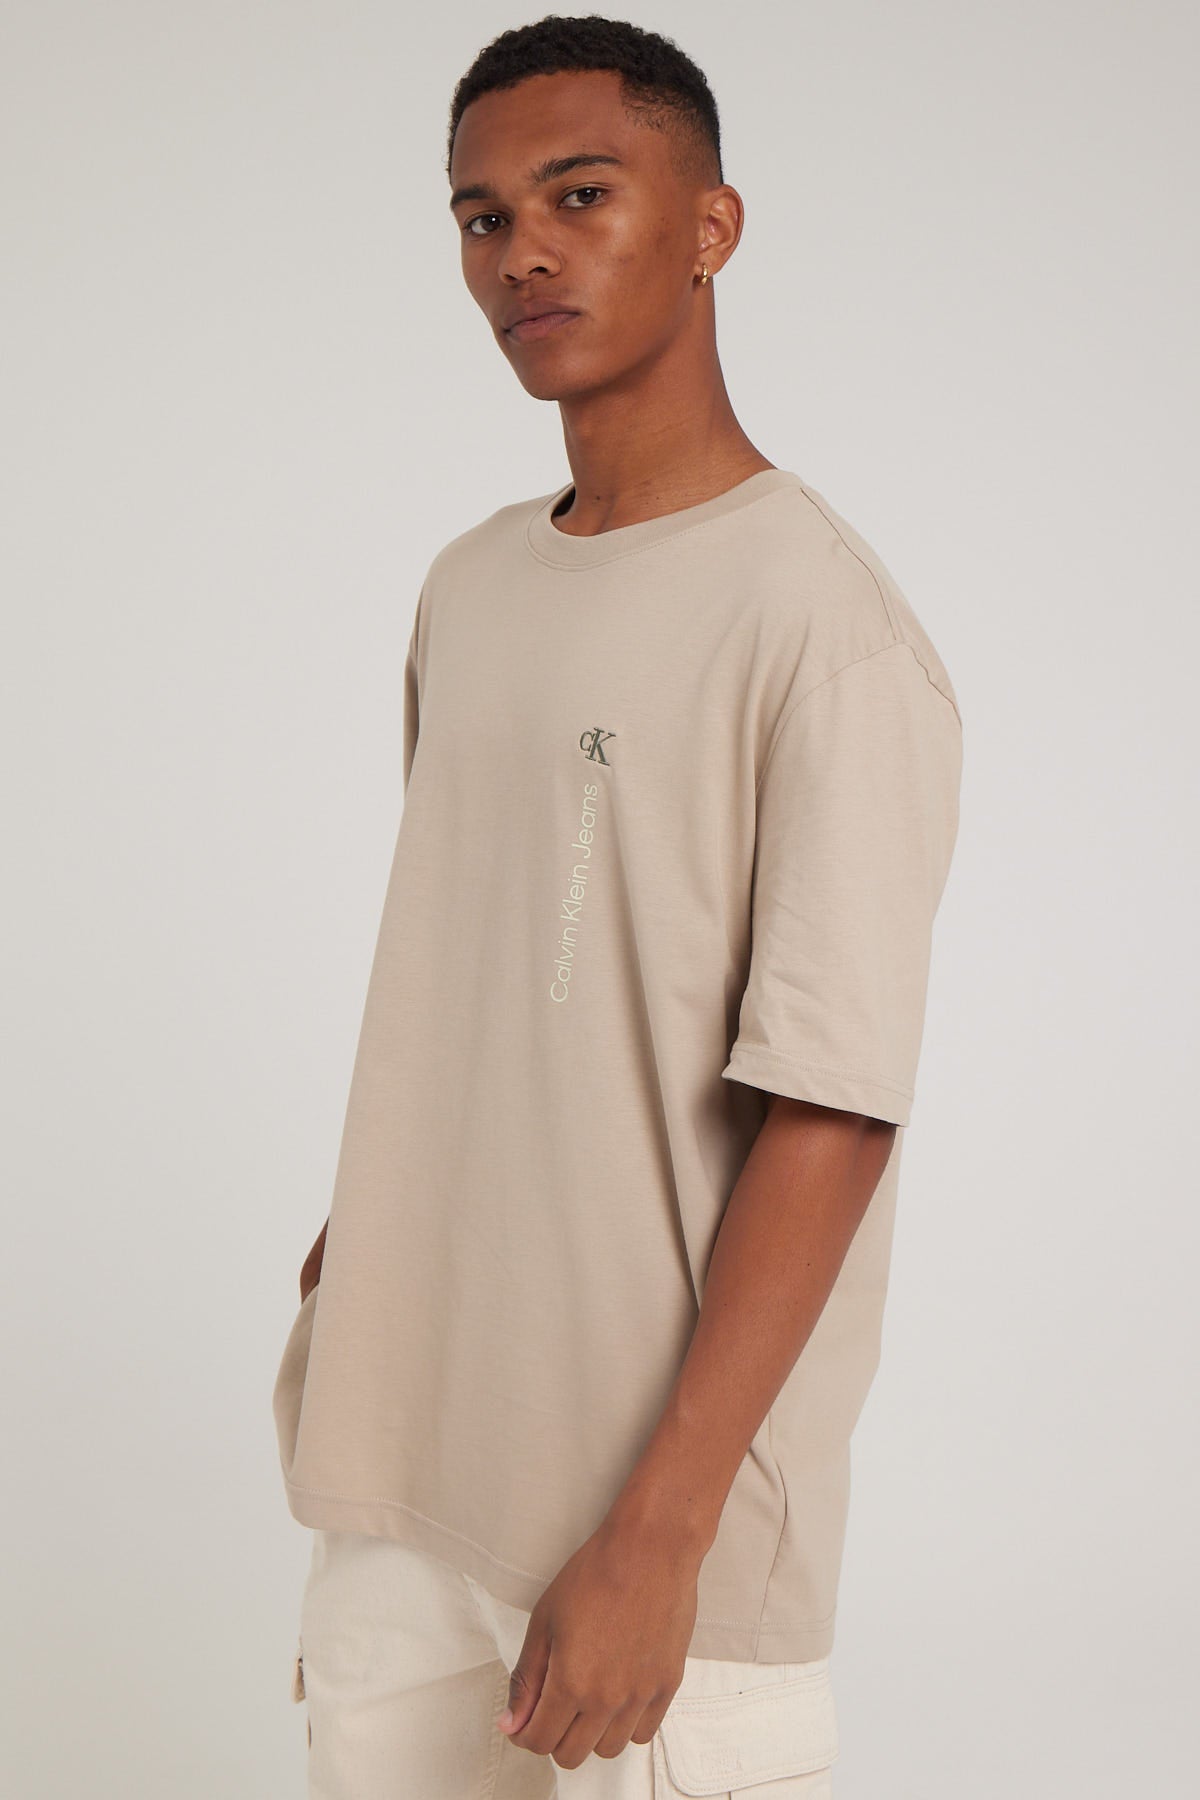 Calvin Klein Vertical Institutional Tee Plaza Taupe